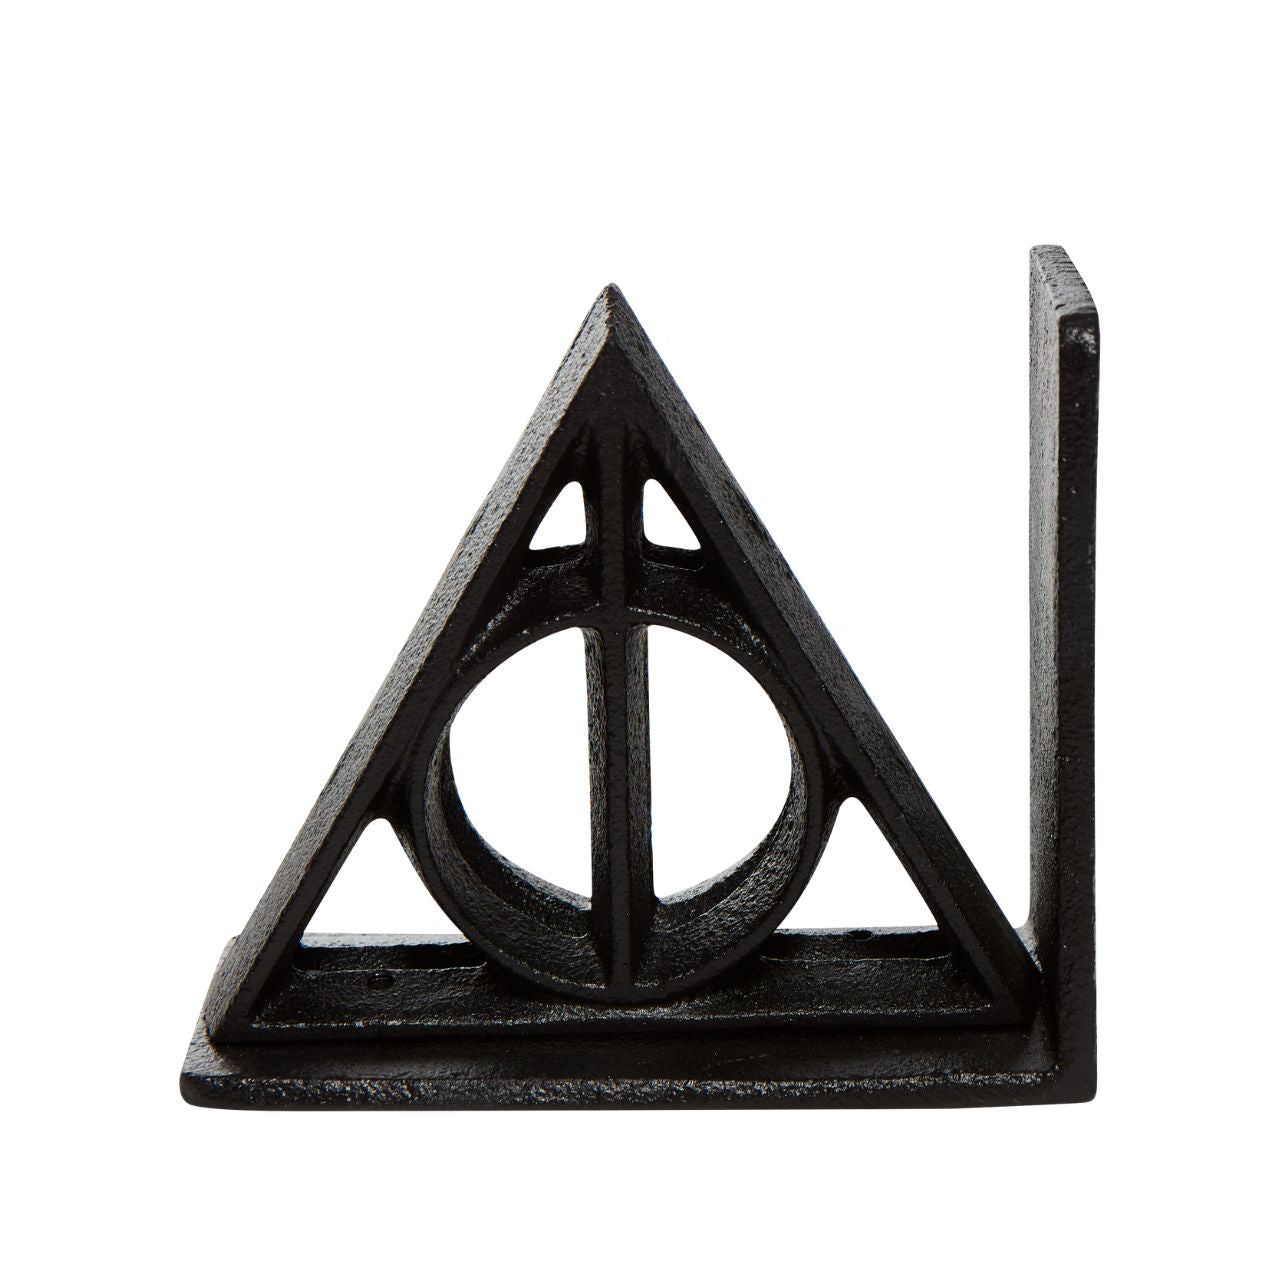 Deathly Hallows Bookends  Crafted from high quality metal, these bookends are the perfect addition to any fans collection. Featuring the iconic "Deathly Hallows" symbol, they are painted jet black and sure to be a talking point. These are the perfect gift for any Harry Potter enthusiast.